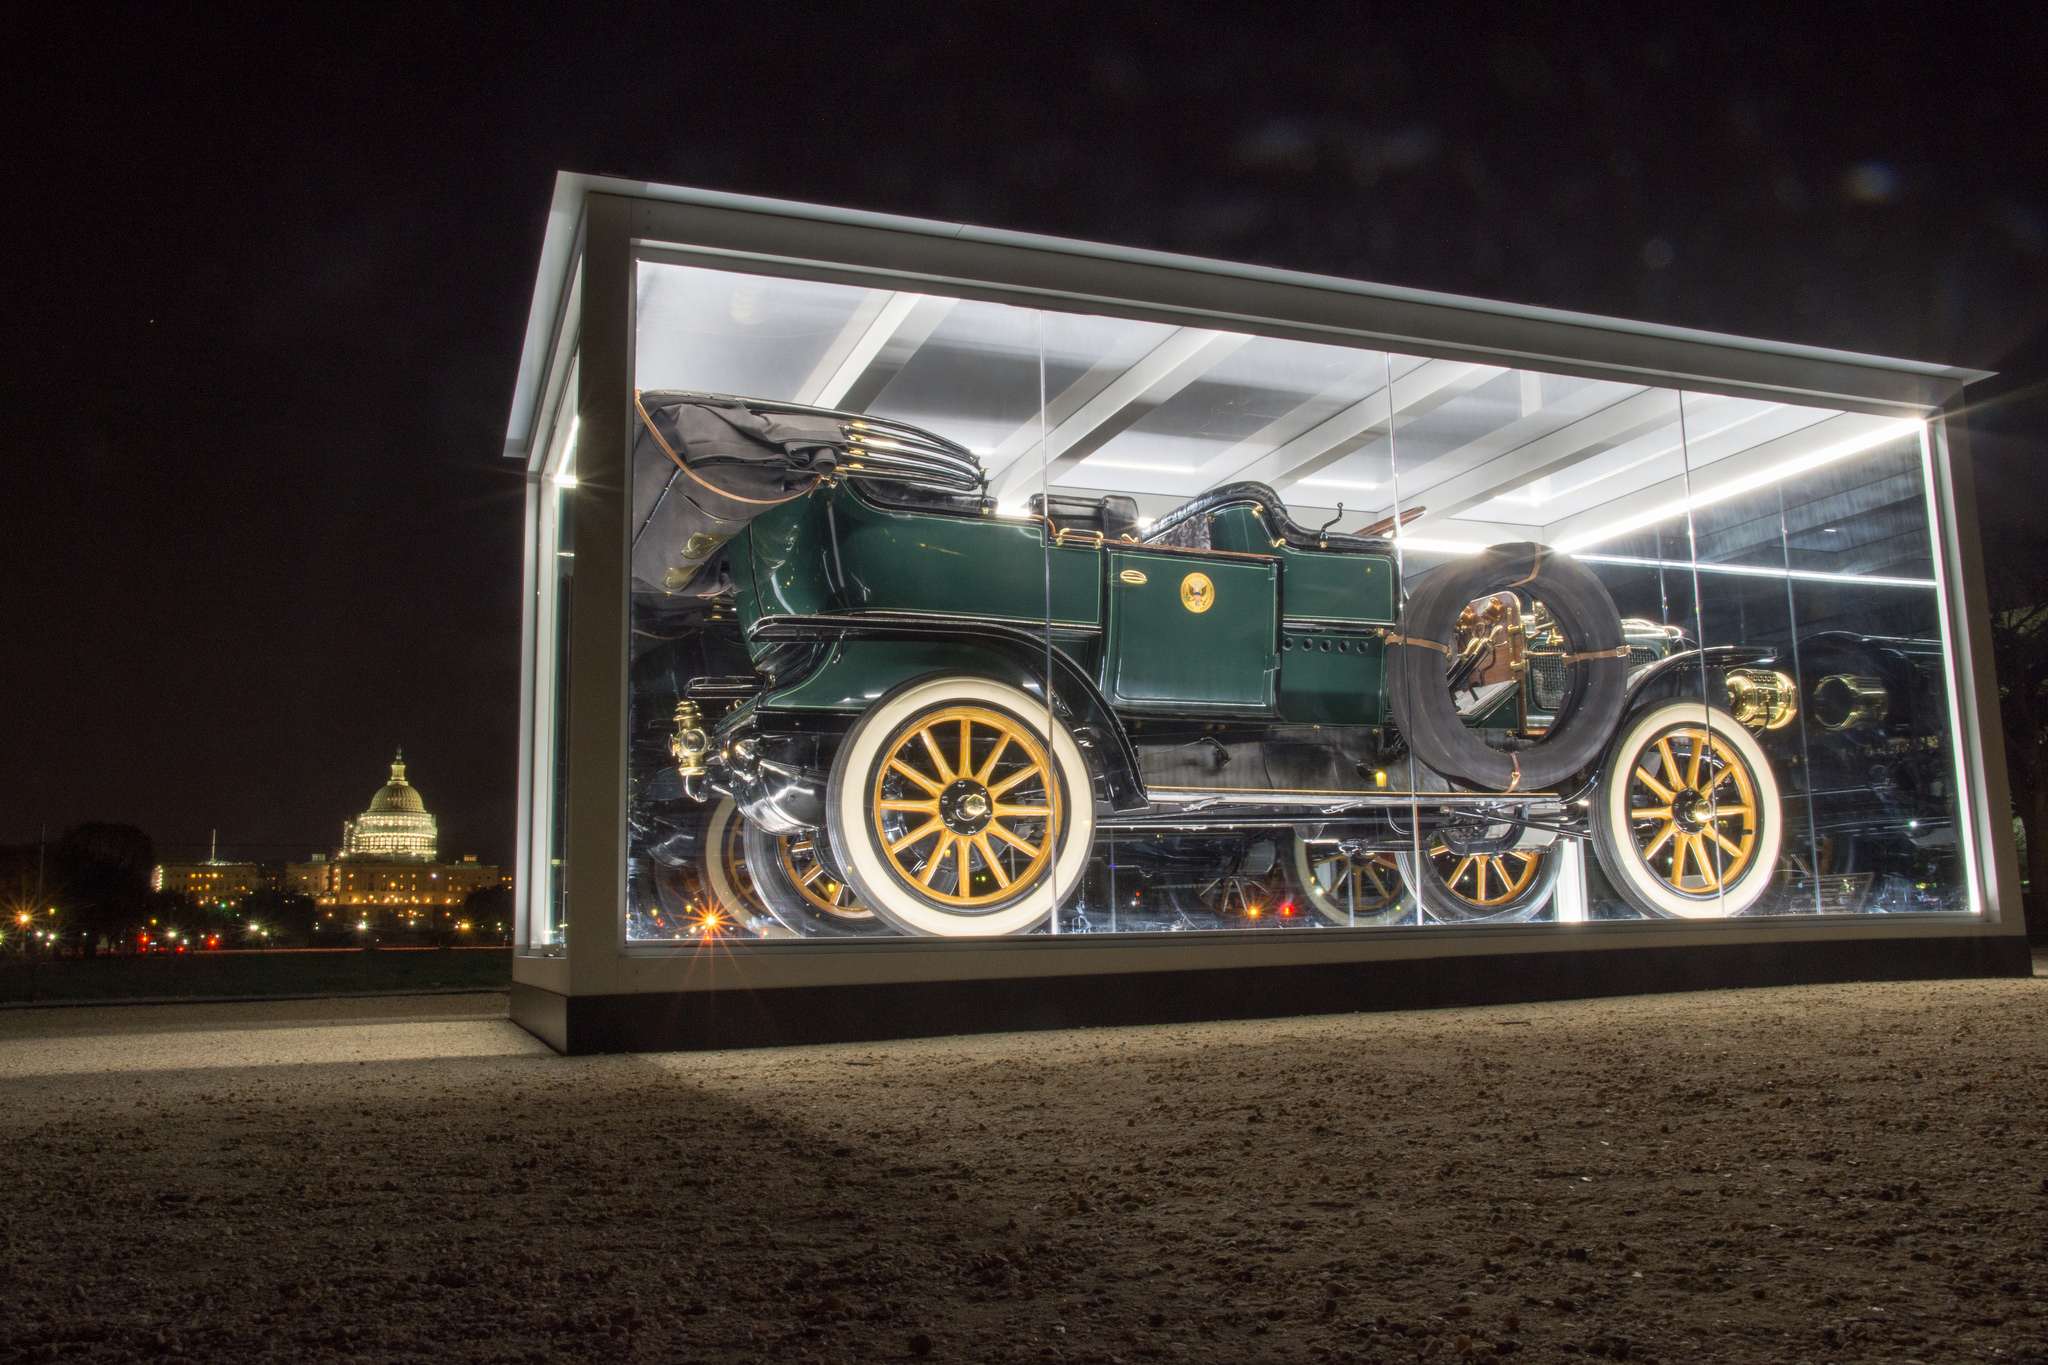 taft steam car Exhibition of Presidential Taft Steam Car at the National Mall